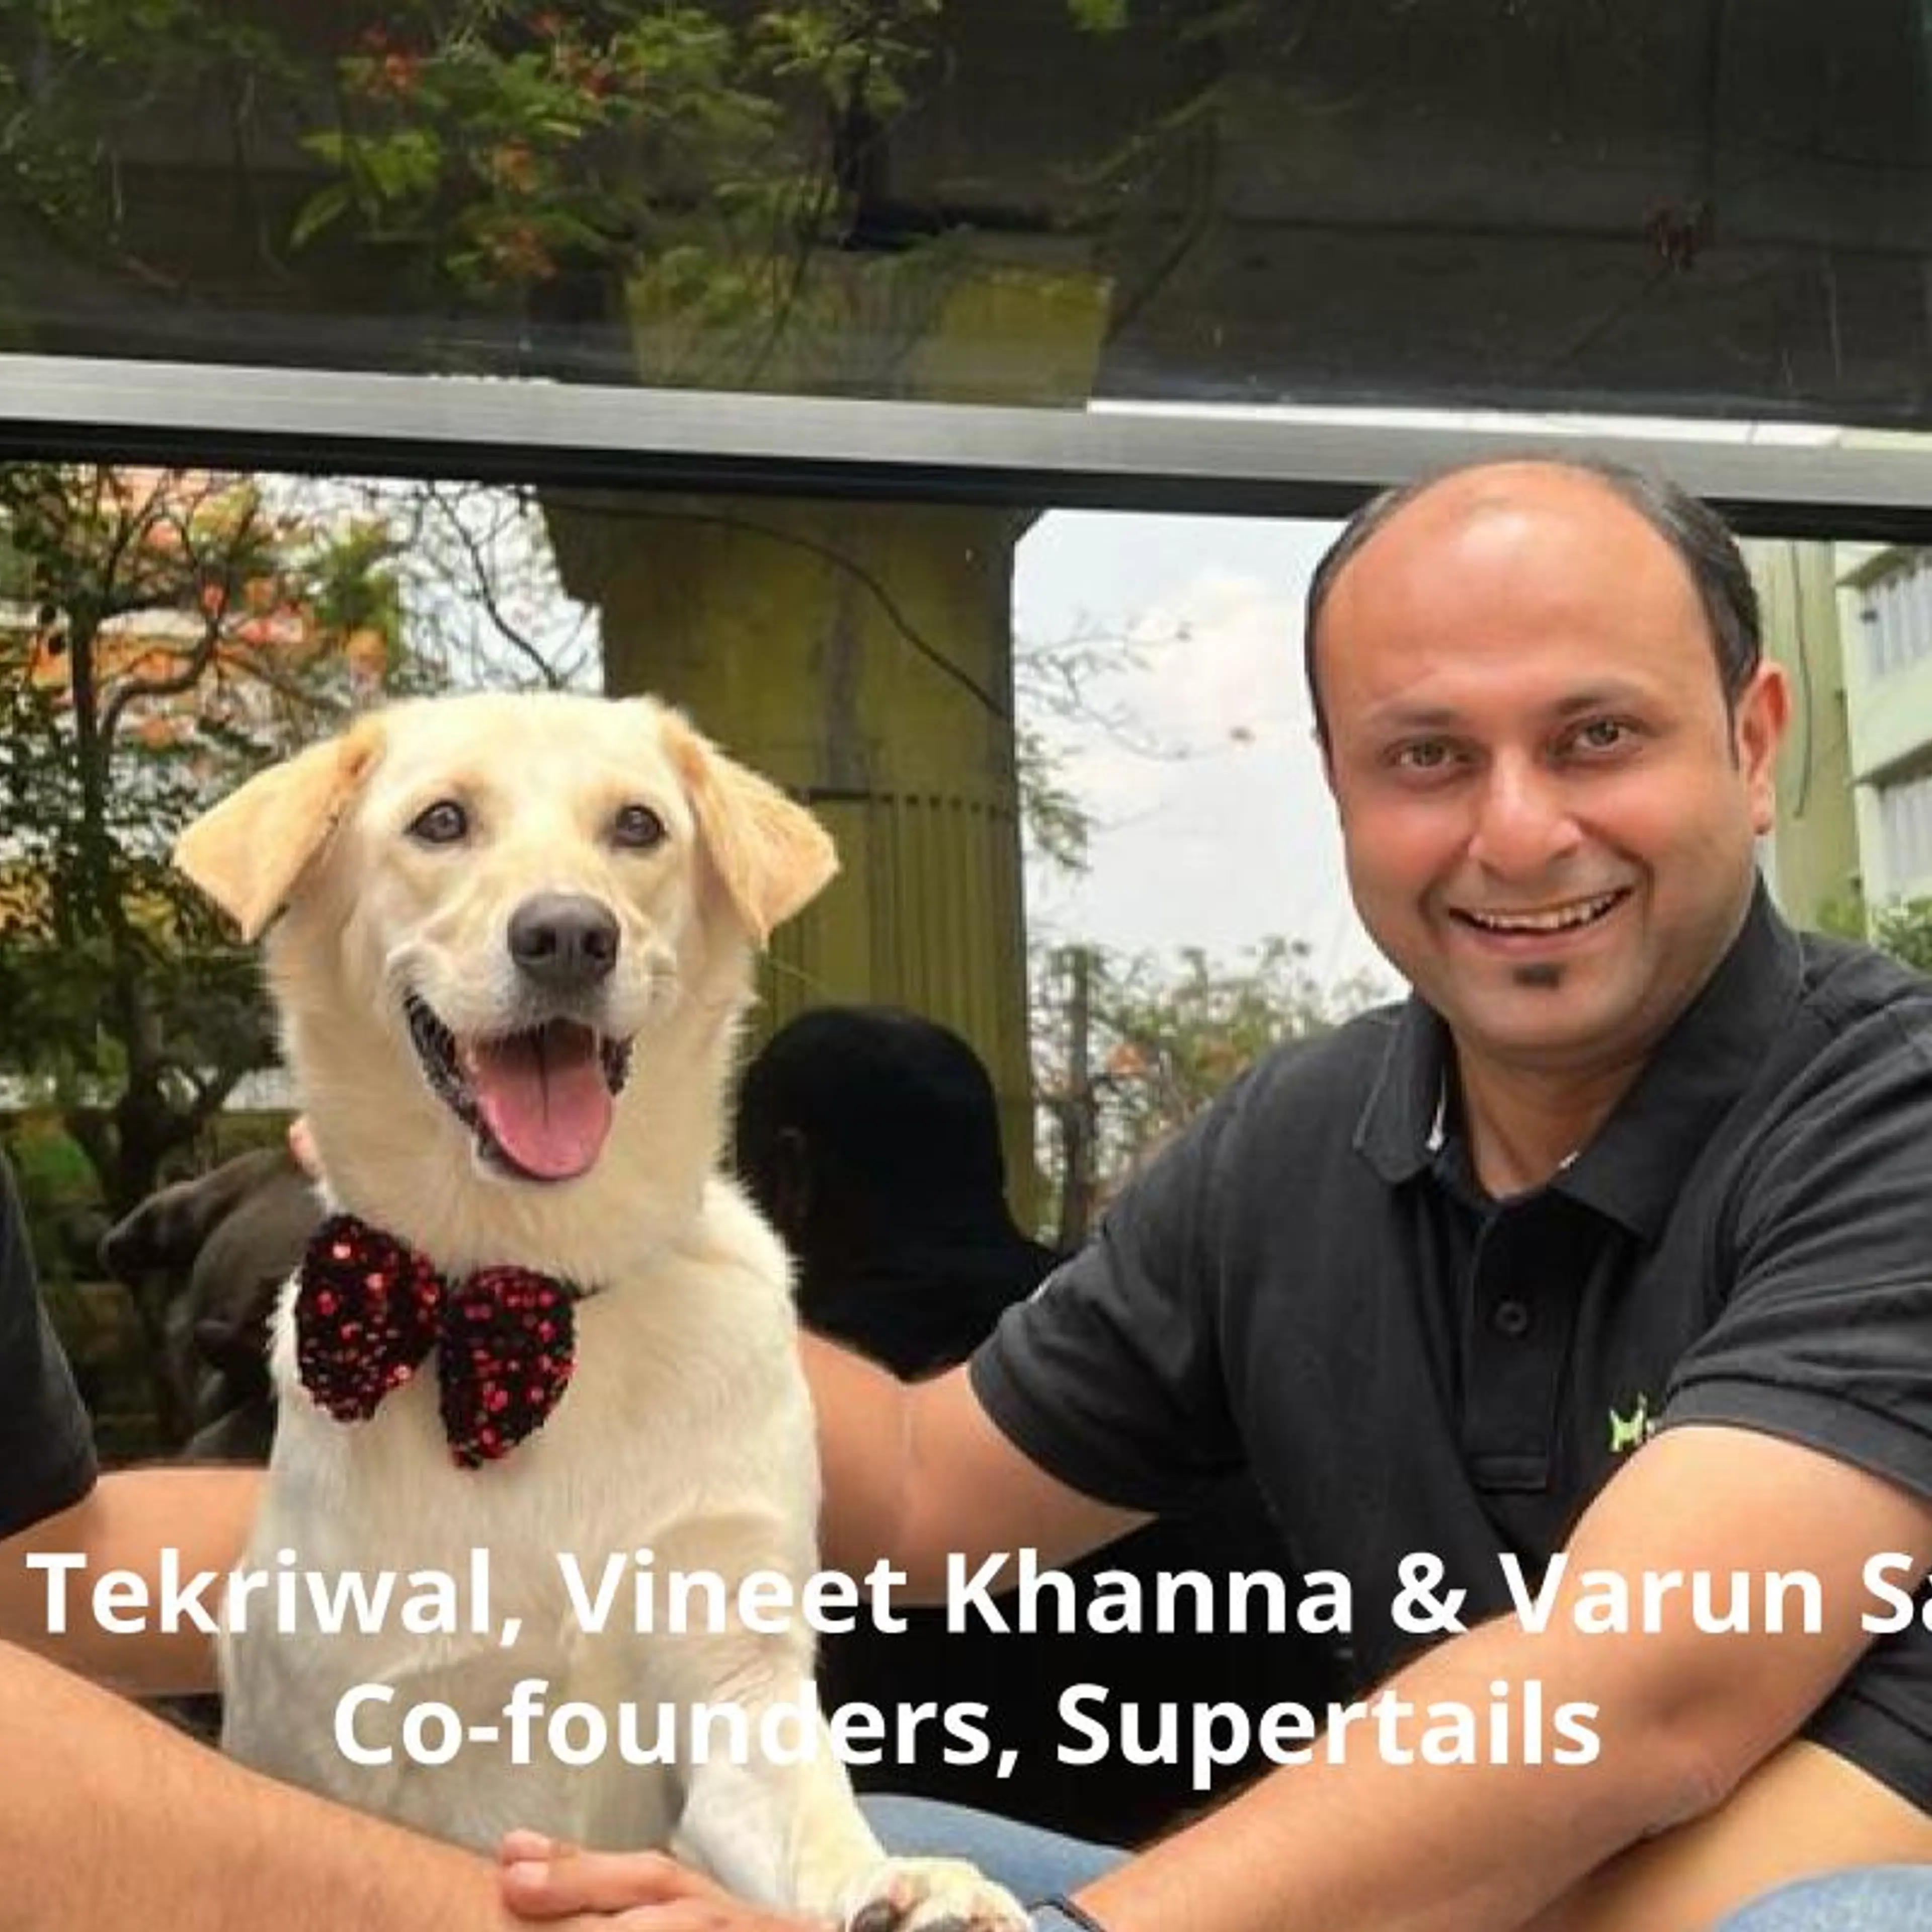 Pet care startup Supertails secures $15M funding, bets on private label business